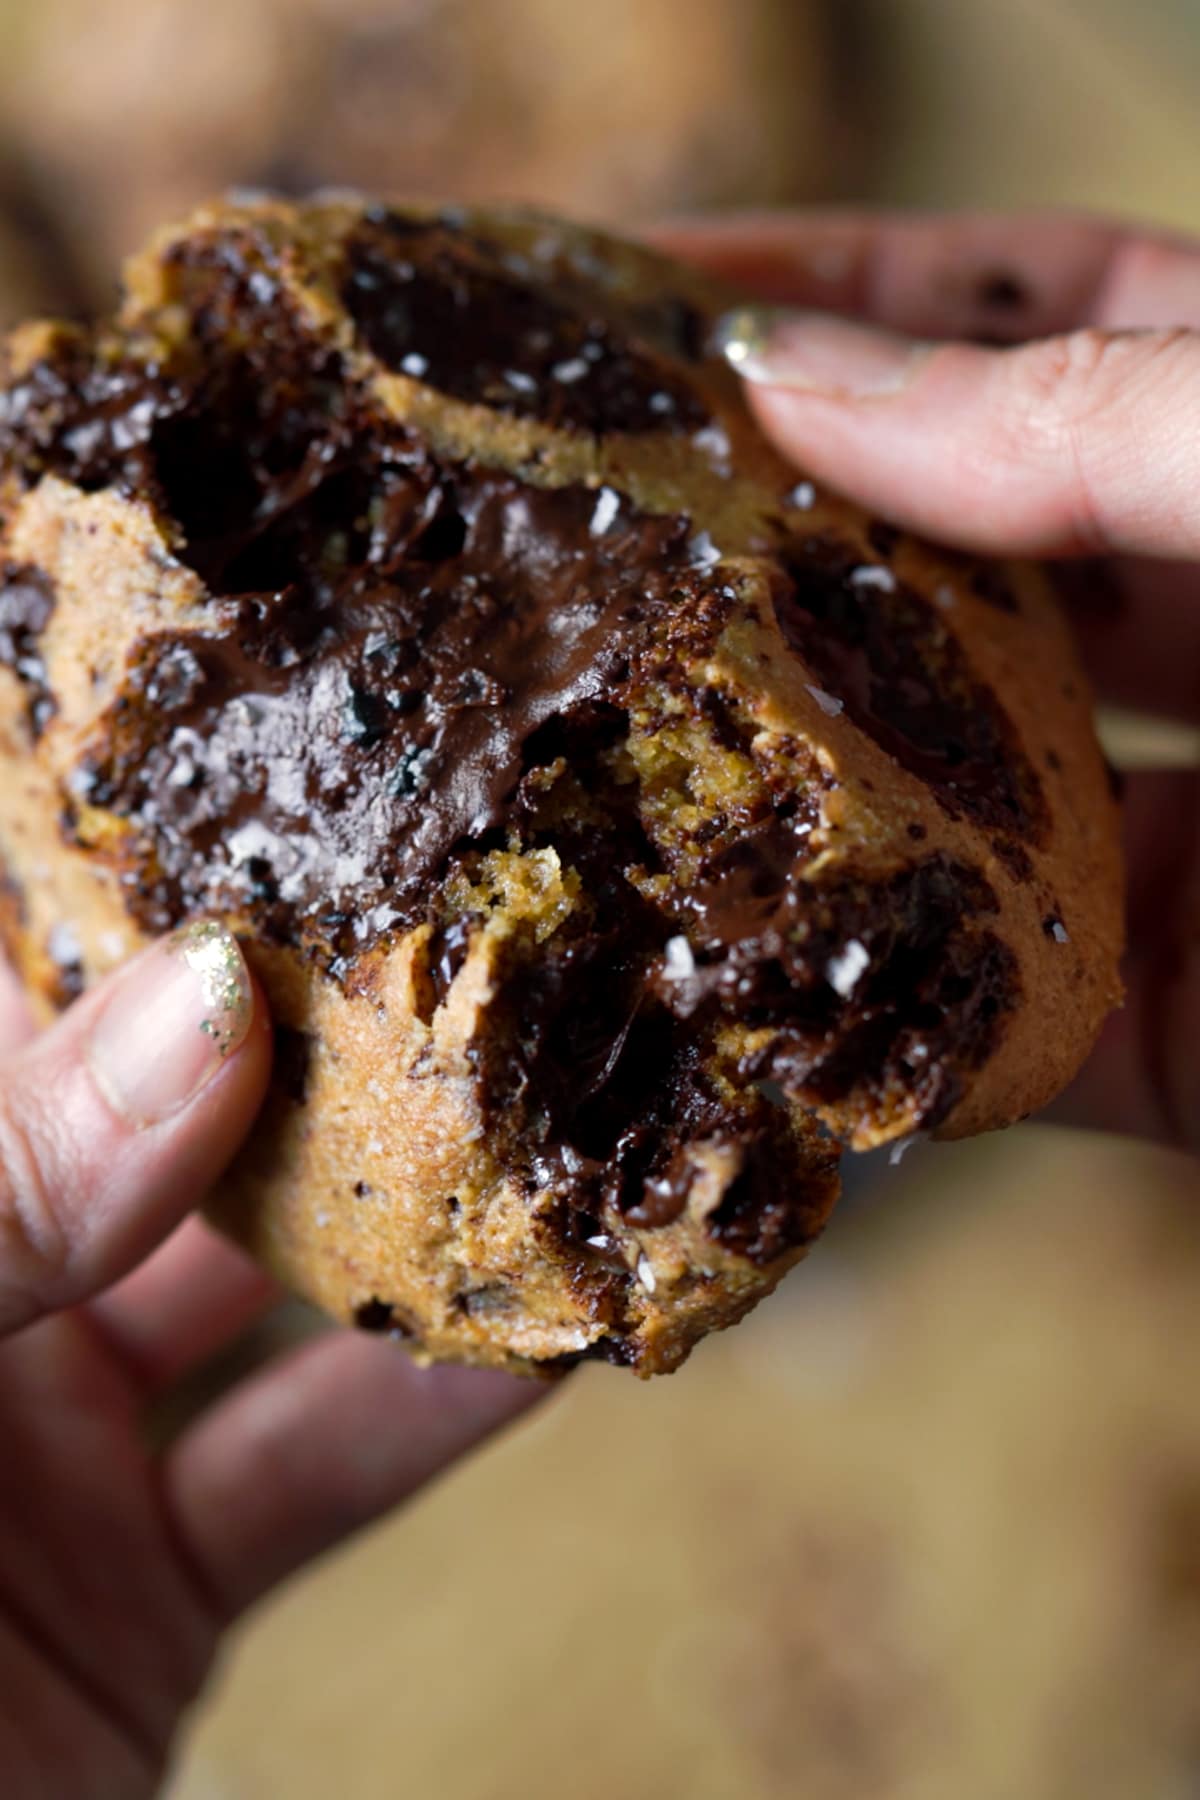 Halving a brown butter keto chocolate chip cookie showing the gooey chocolate